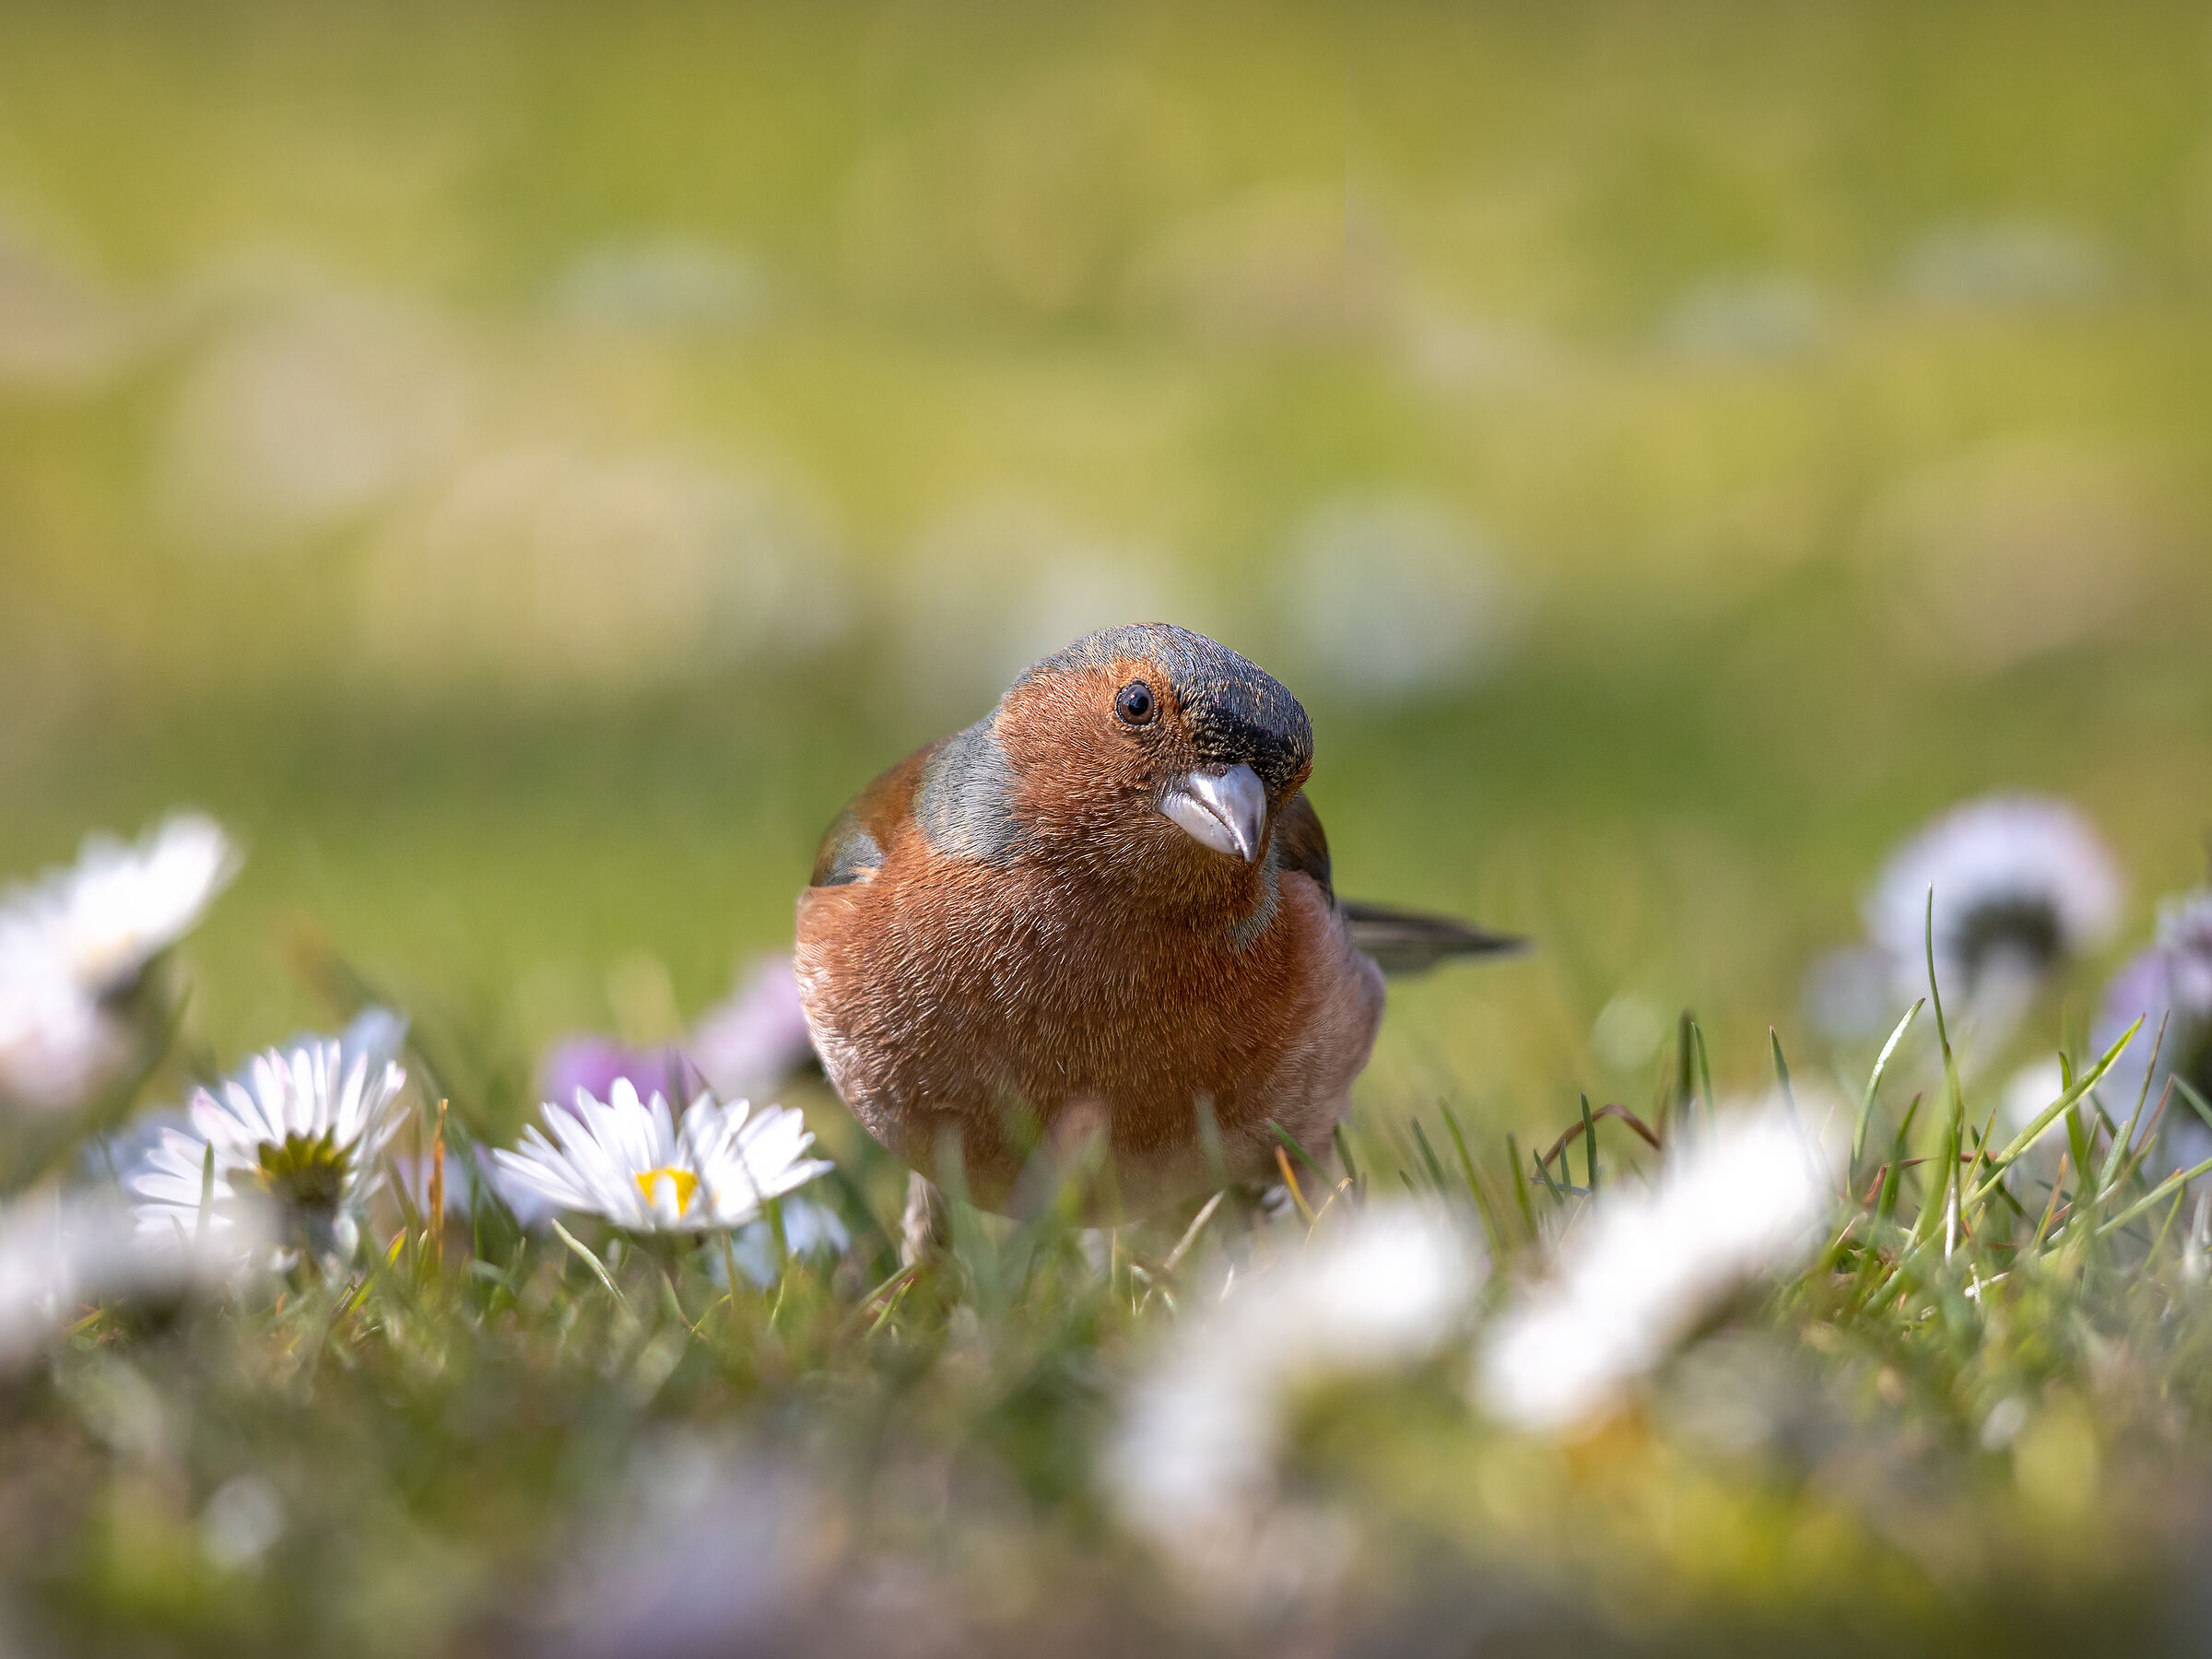 The Chaffinch and the meadows...